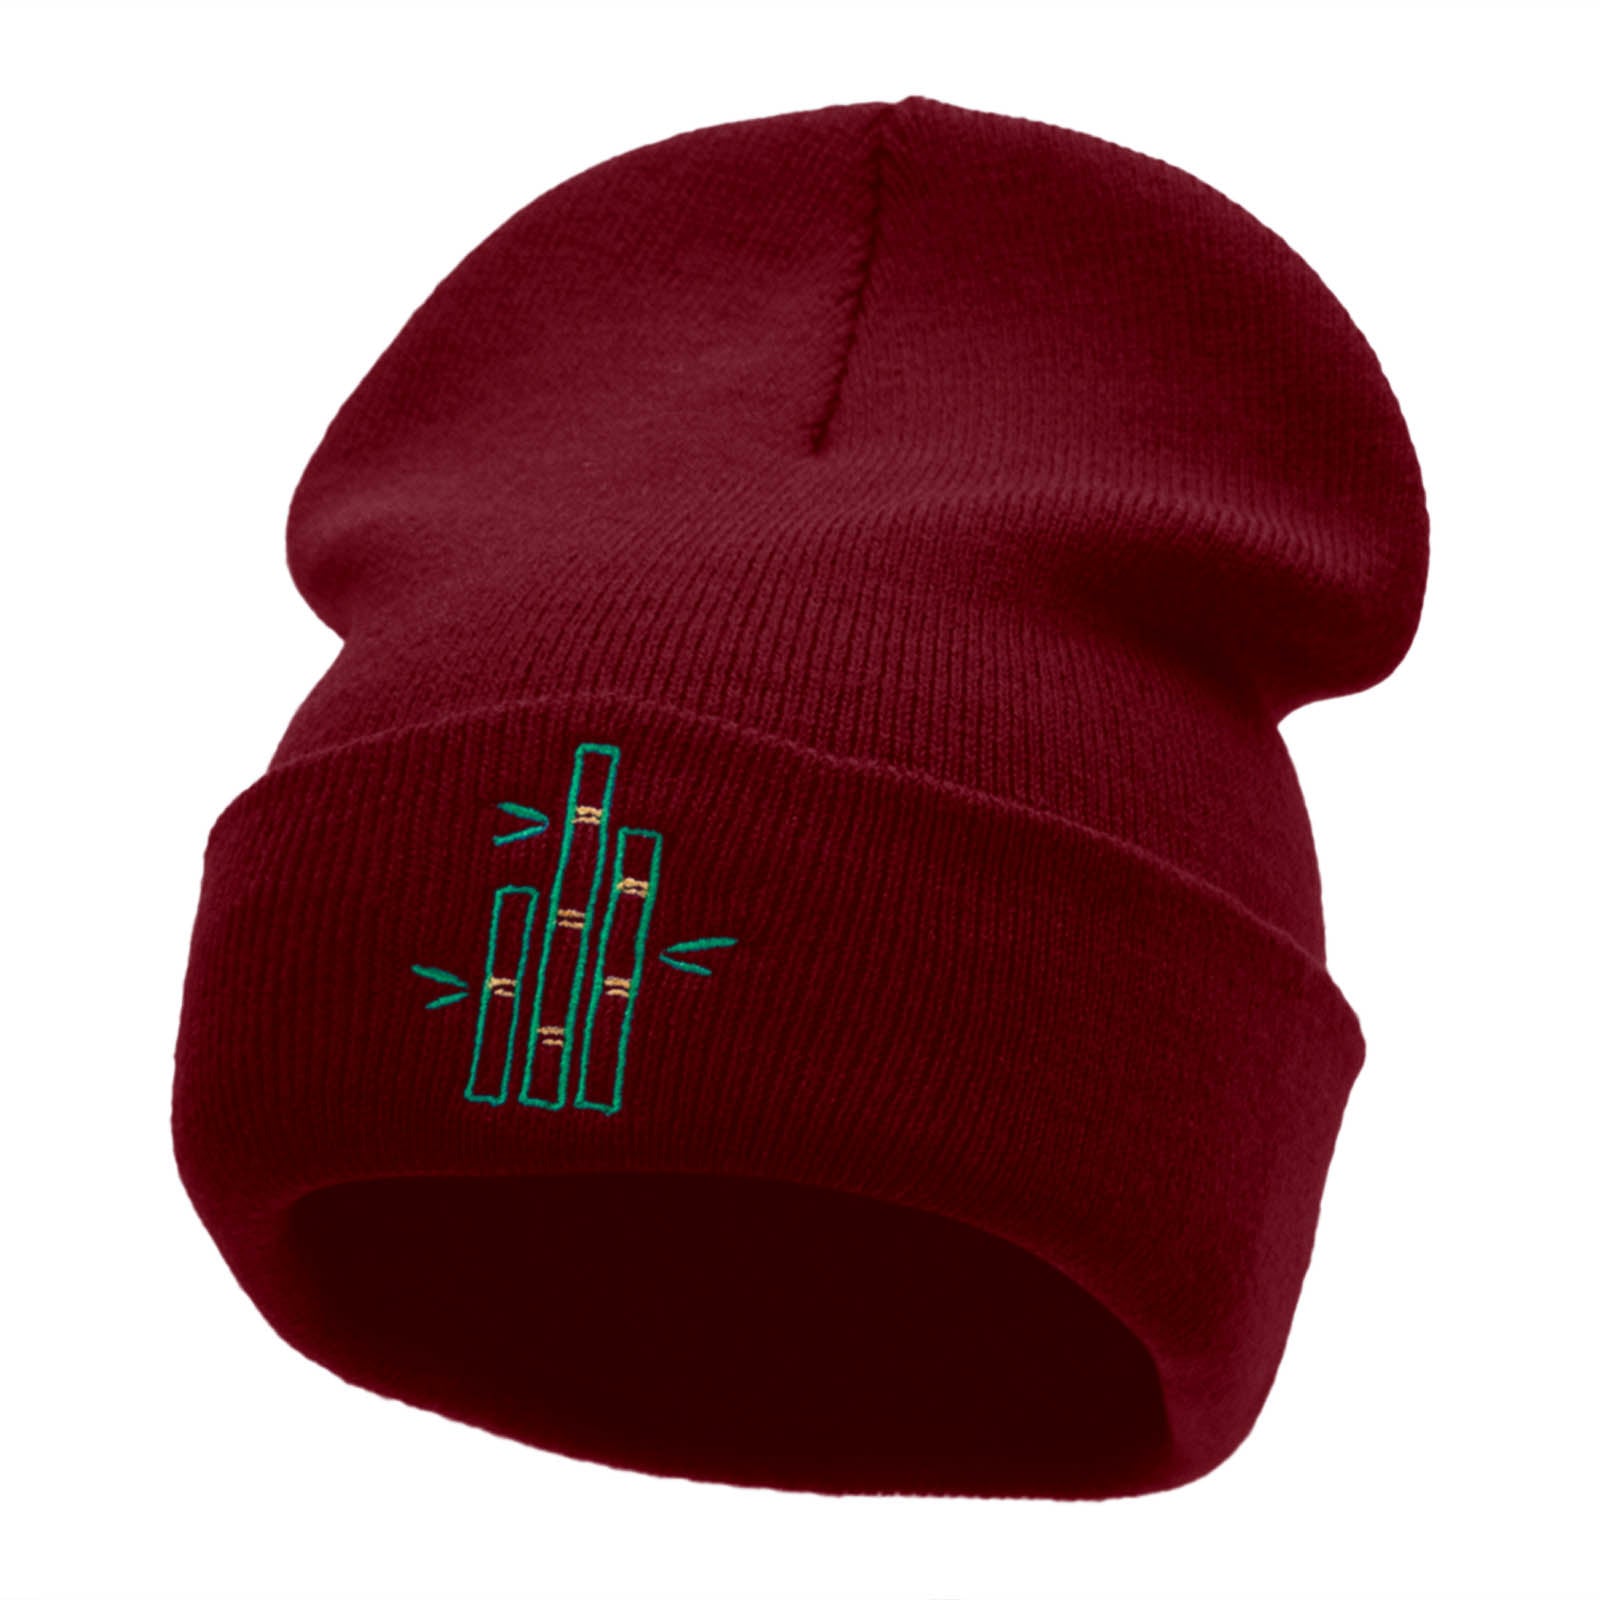 Bamboo Stalks Embroidered 12 Inch Long Knitted Beanie - Maroon OSFM